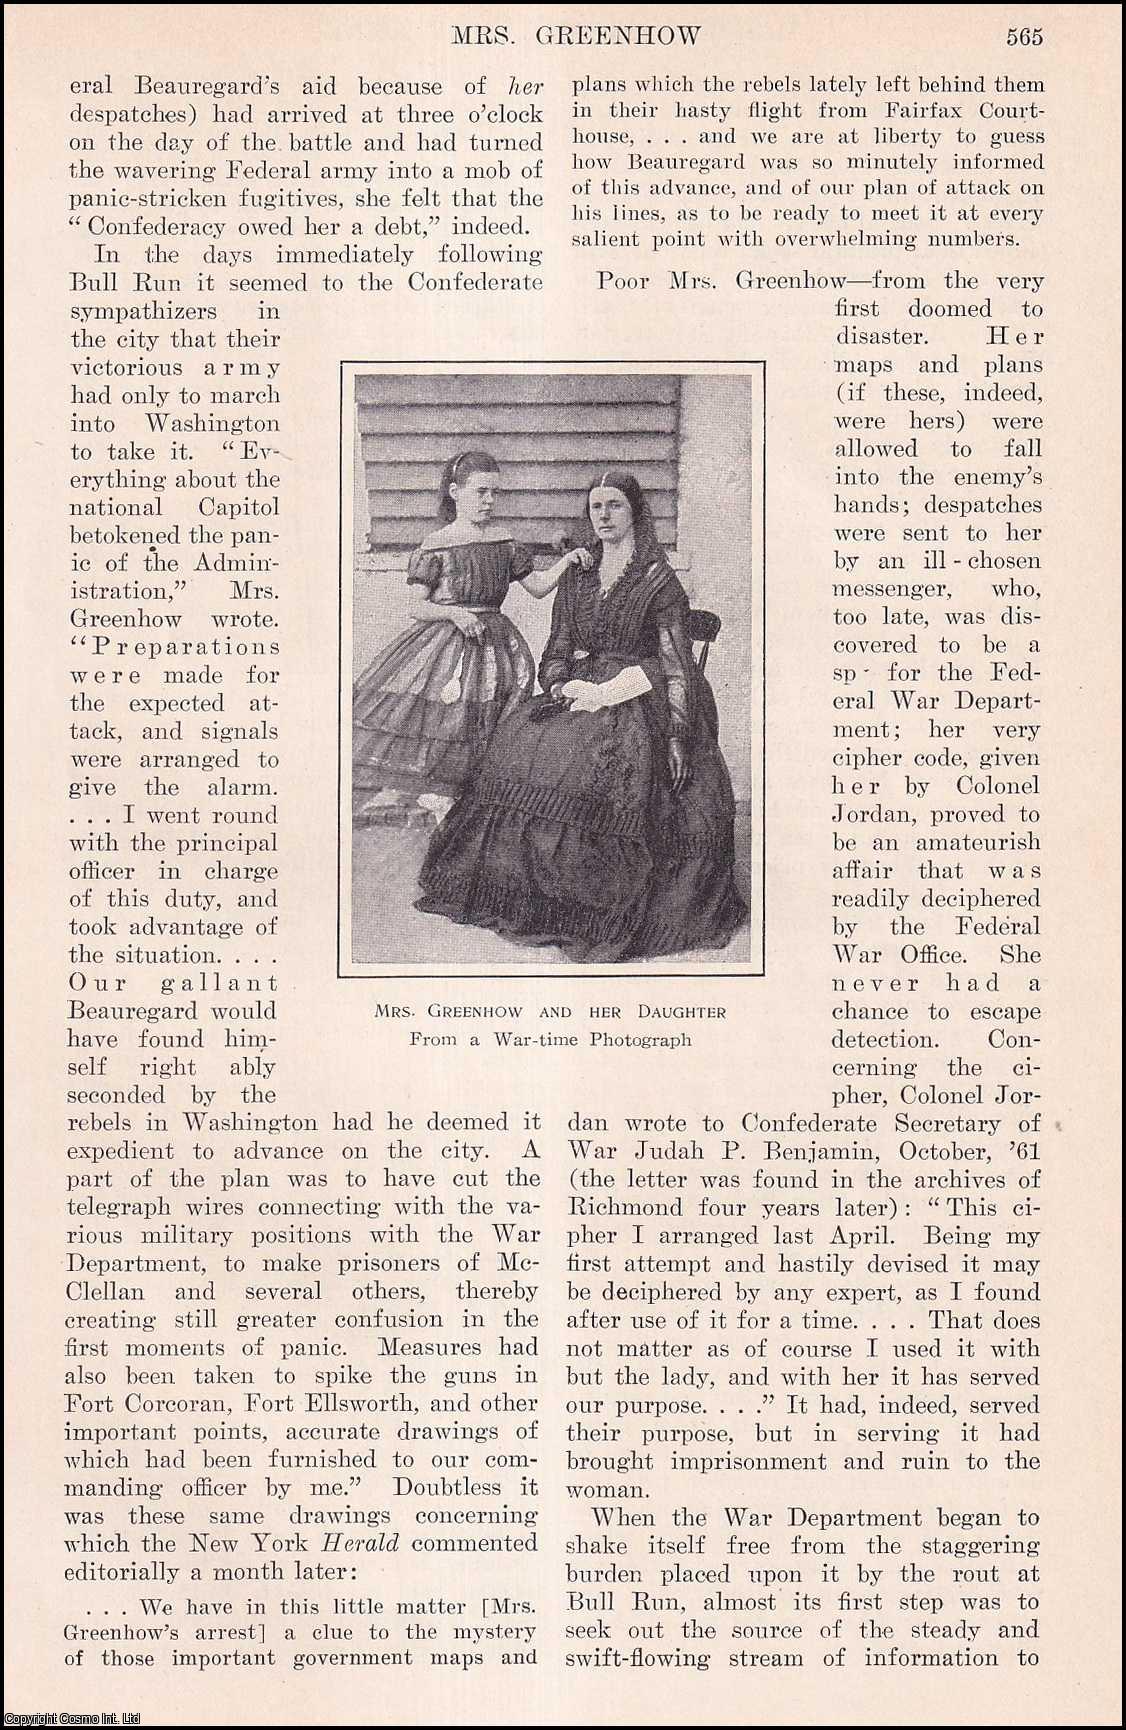 CONFEDERATE SPY - Mrs. Greenhow : Rose O'Neal Greenhow. A Confederate Spy during the American Civil War. By William Gilmore Beymer. An original article from the Harper's Monthly Magazine, 1912.